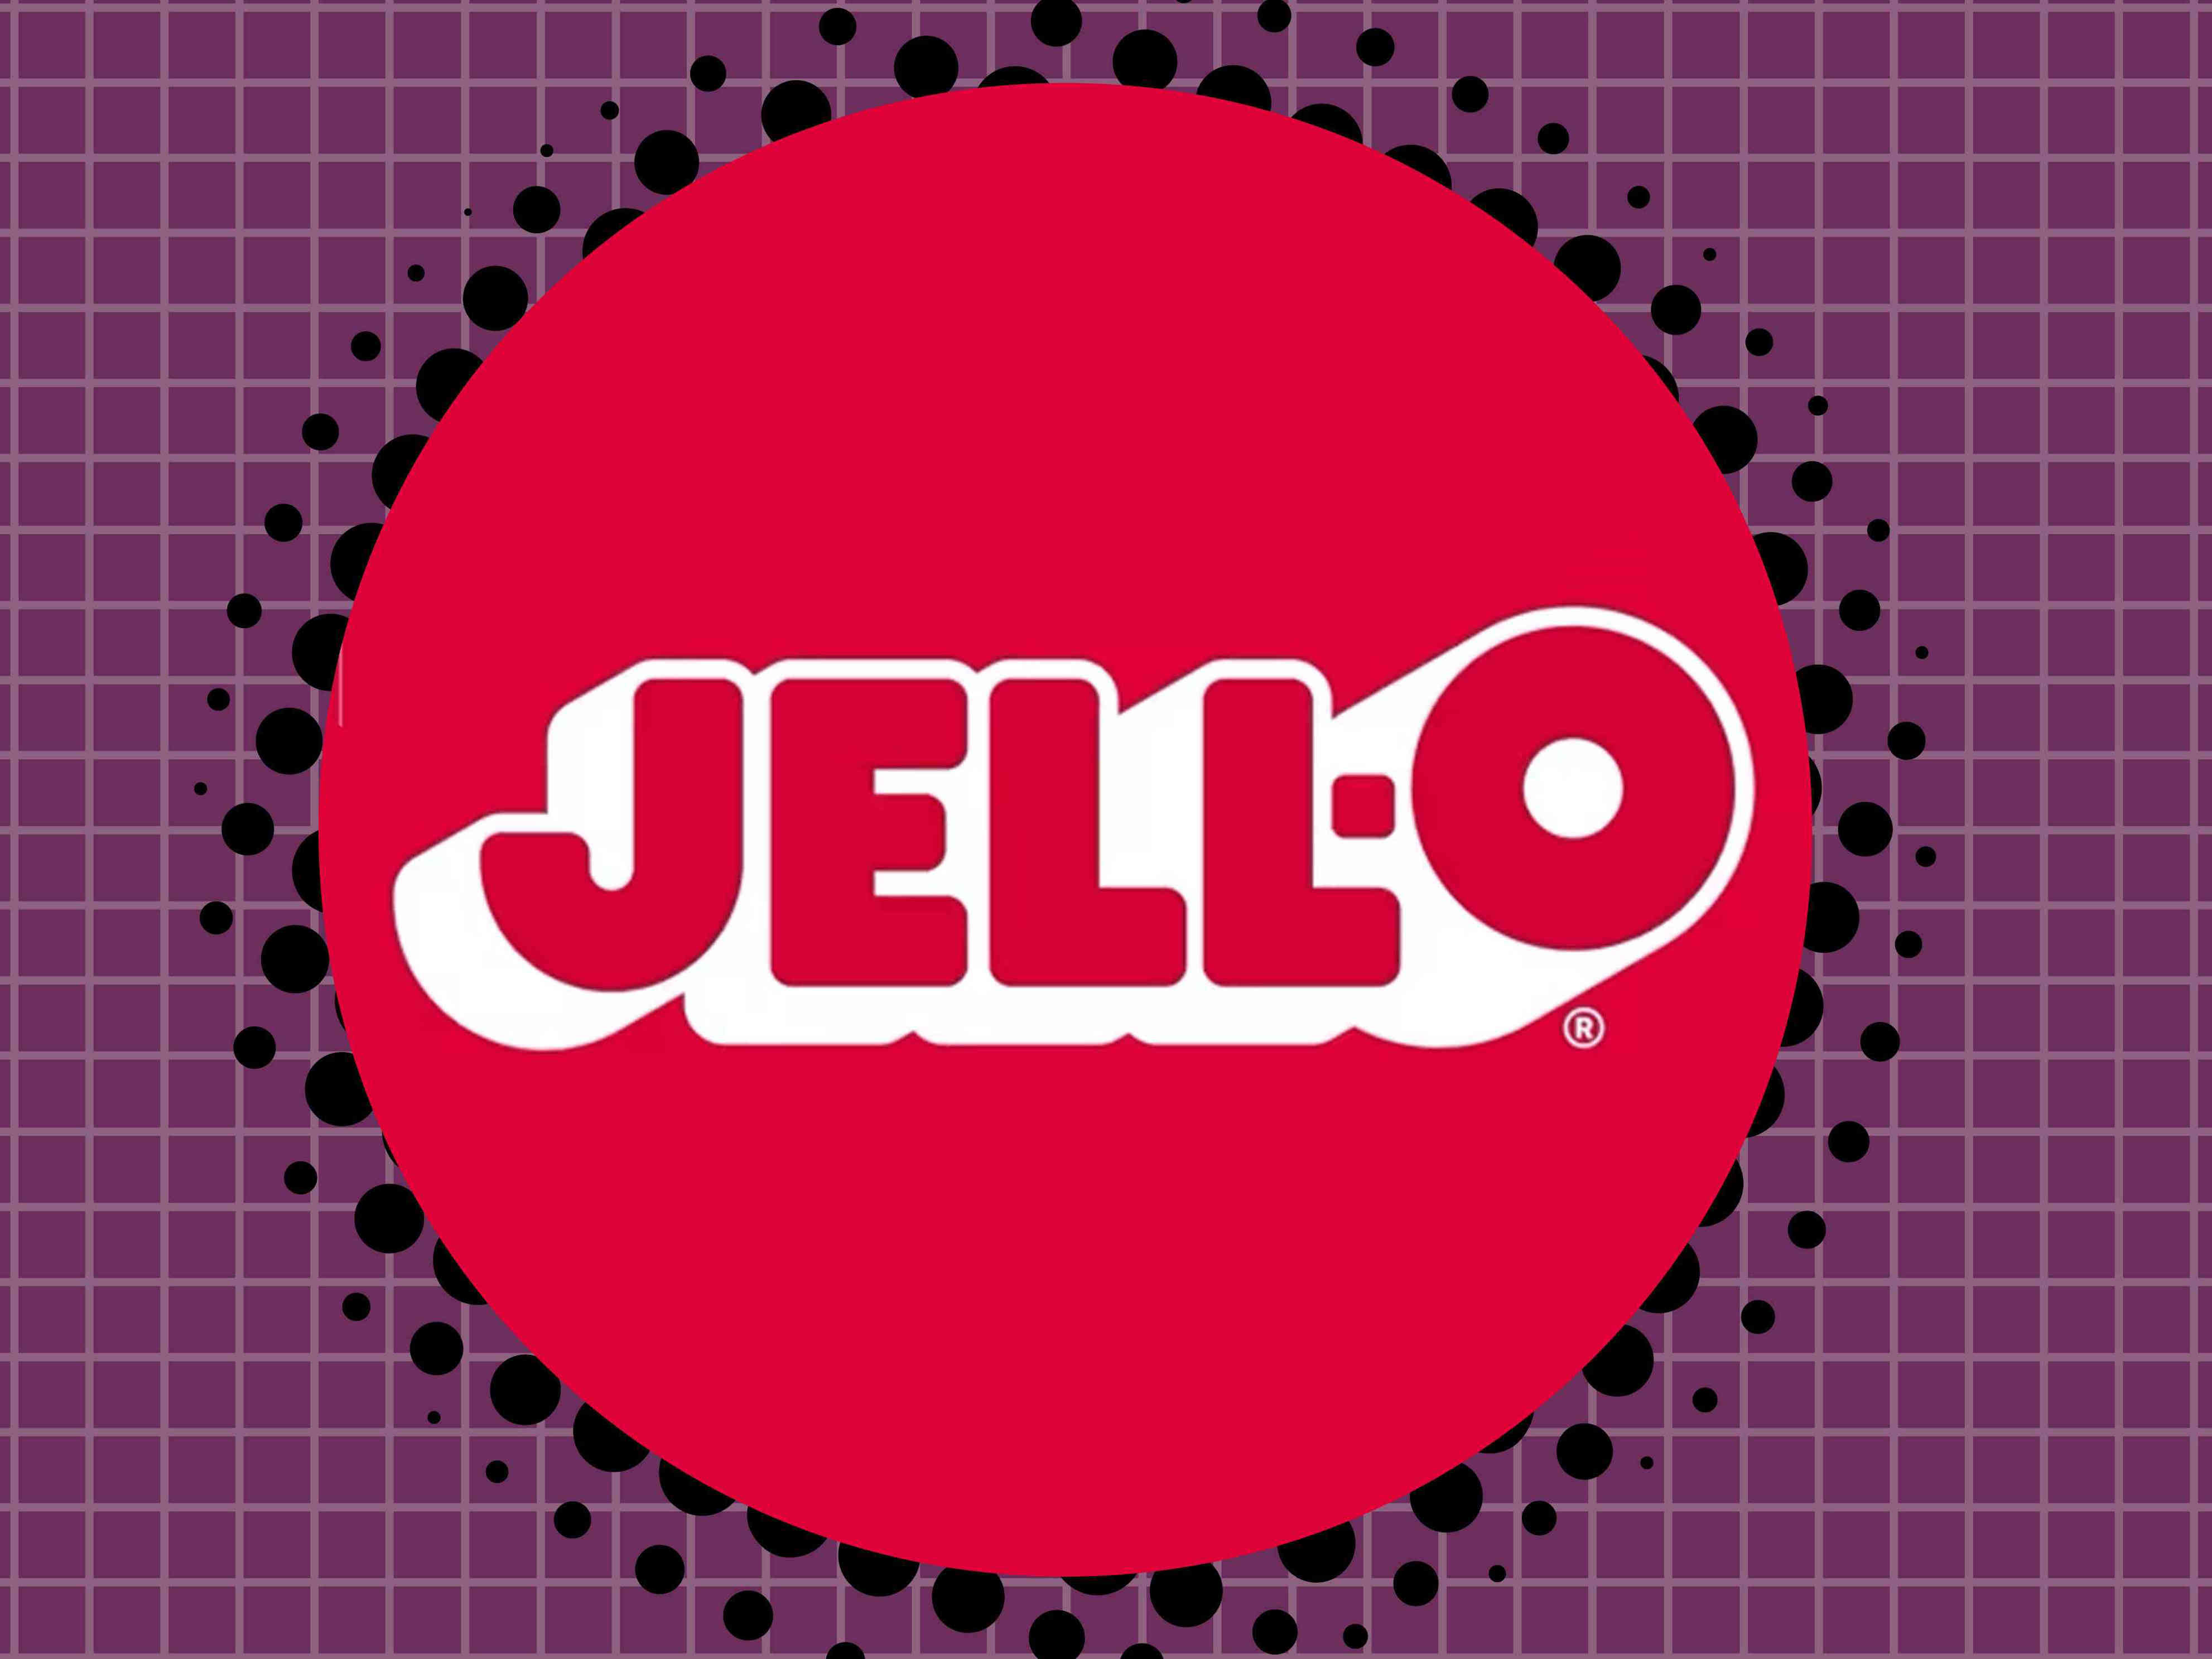 jell-o is launching 2 new flavors for the first time in over 5 years